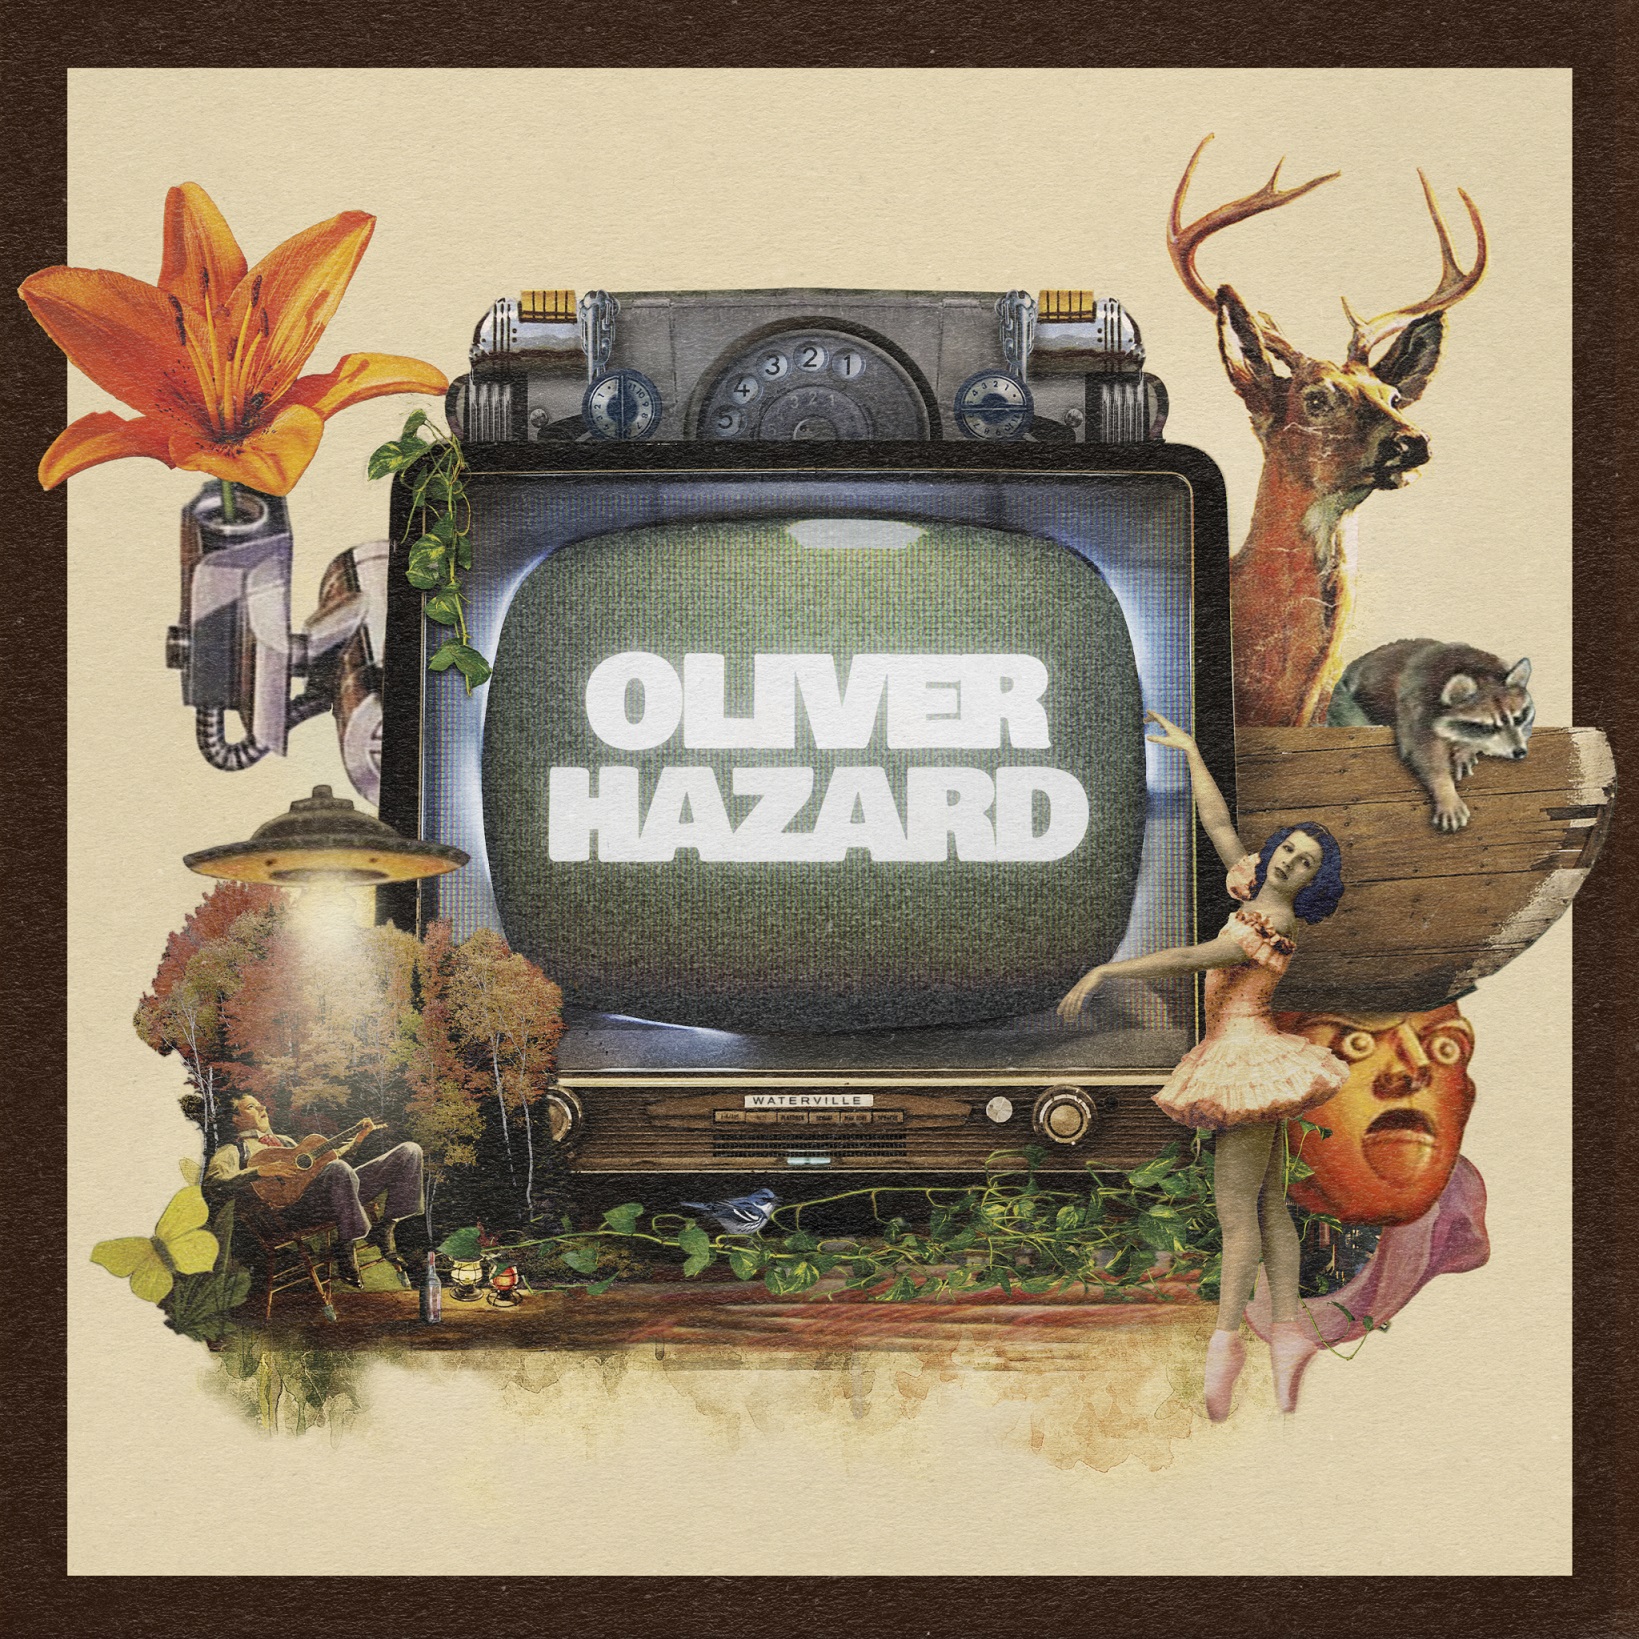 OLIVER HAZARD CAPTIVATES LISTENERS WITH THEIR NEW SELF-TITLED ALBUM